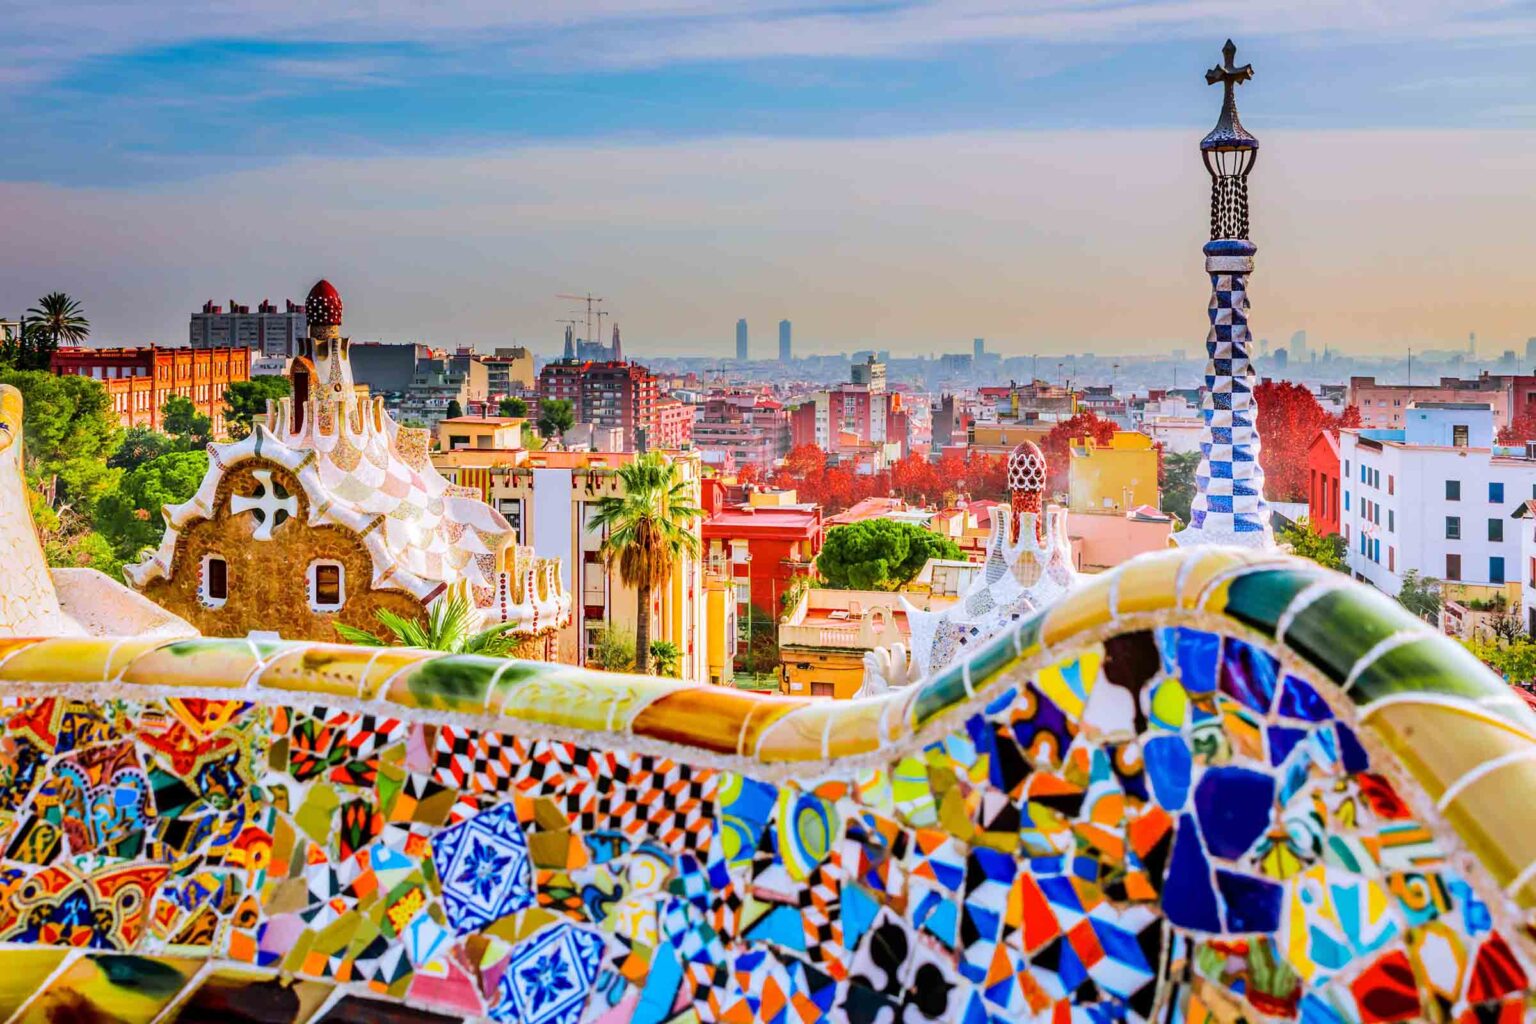 Are you planning a trip to Barcelona? It is important to know the laws and customs surrounding weed. Dive into the details of Cannabis Clubs in Barcelona!